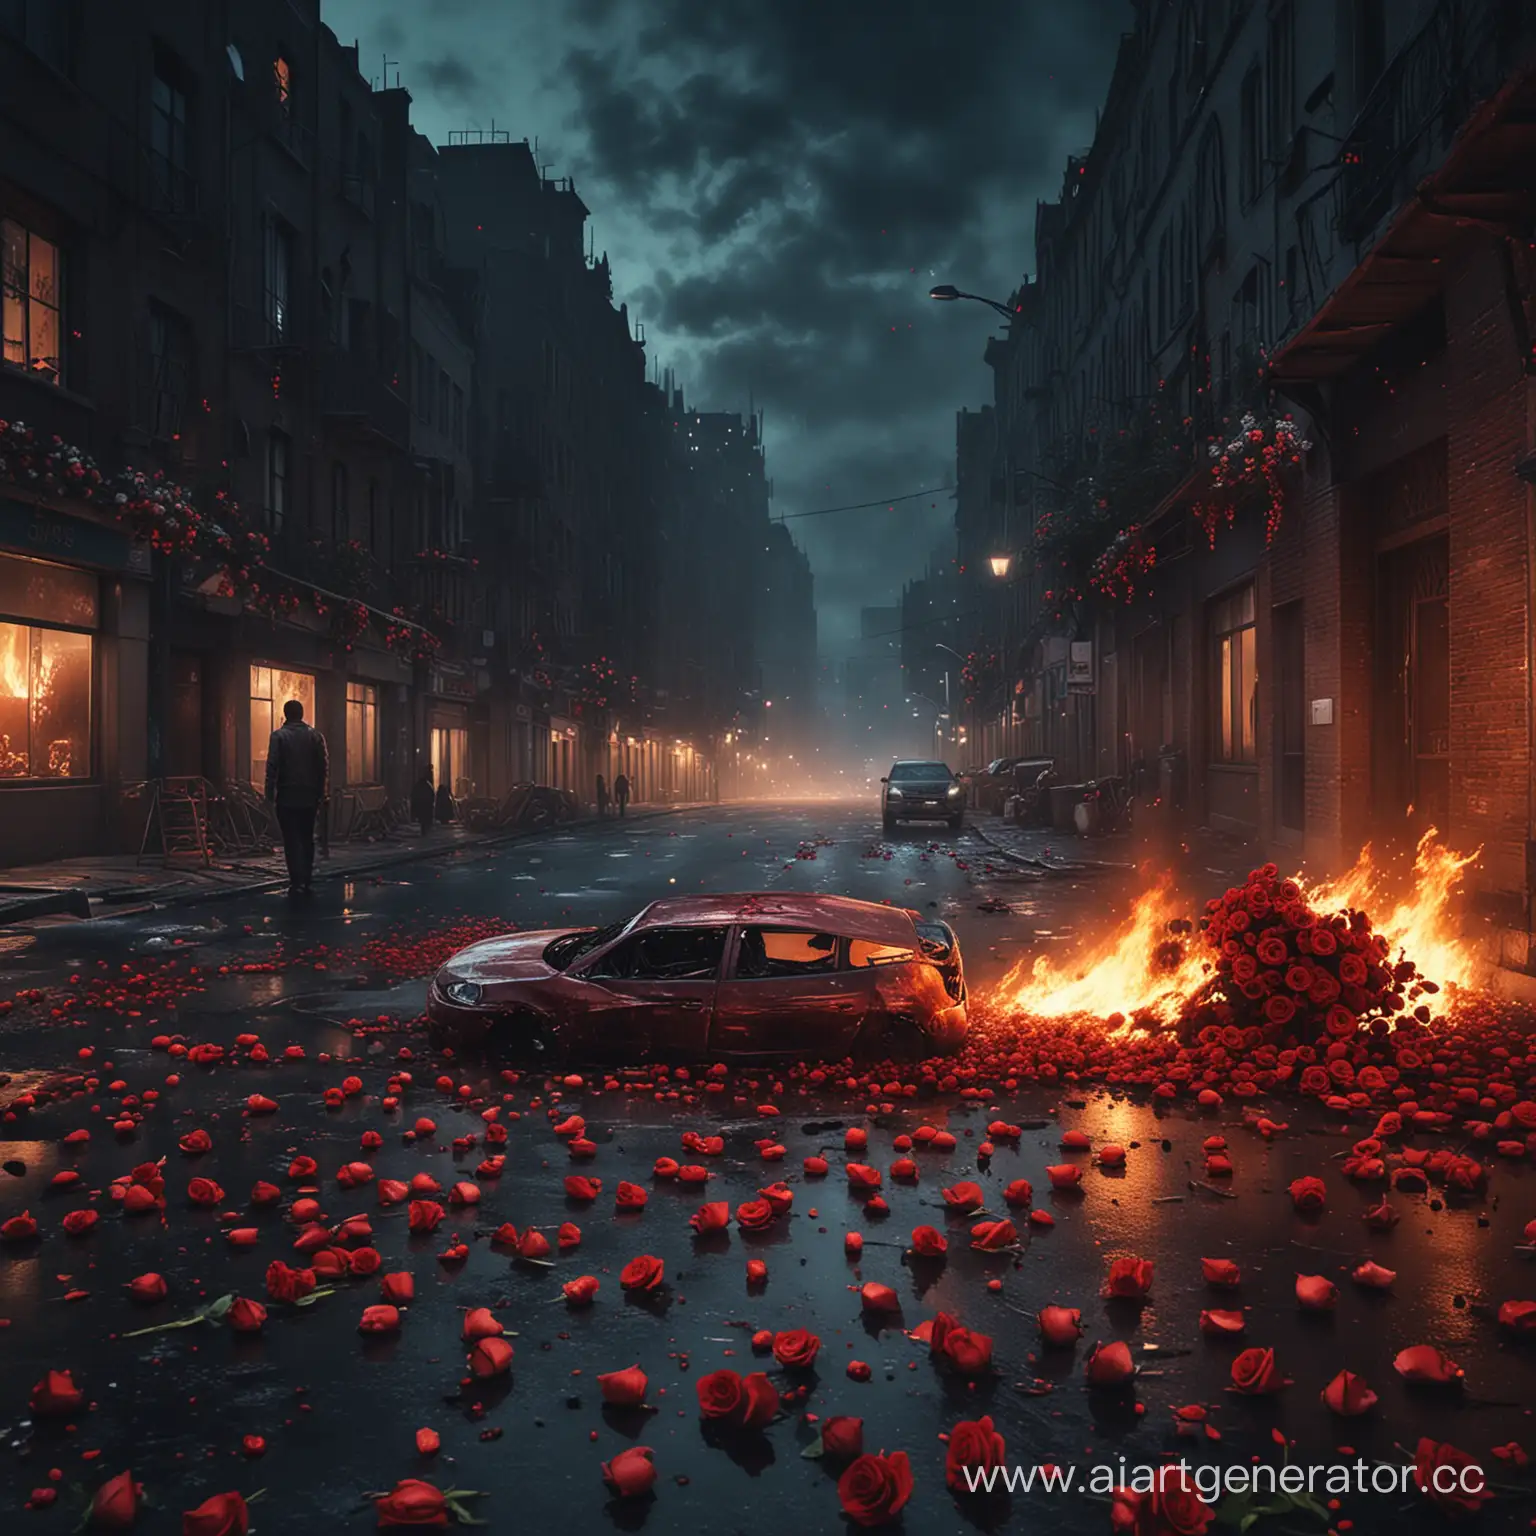 Urban-Night-Scene-Fire-Accident-Amidst-Roses-and-Blood